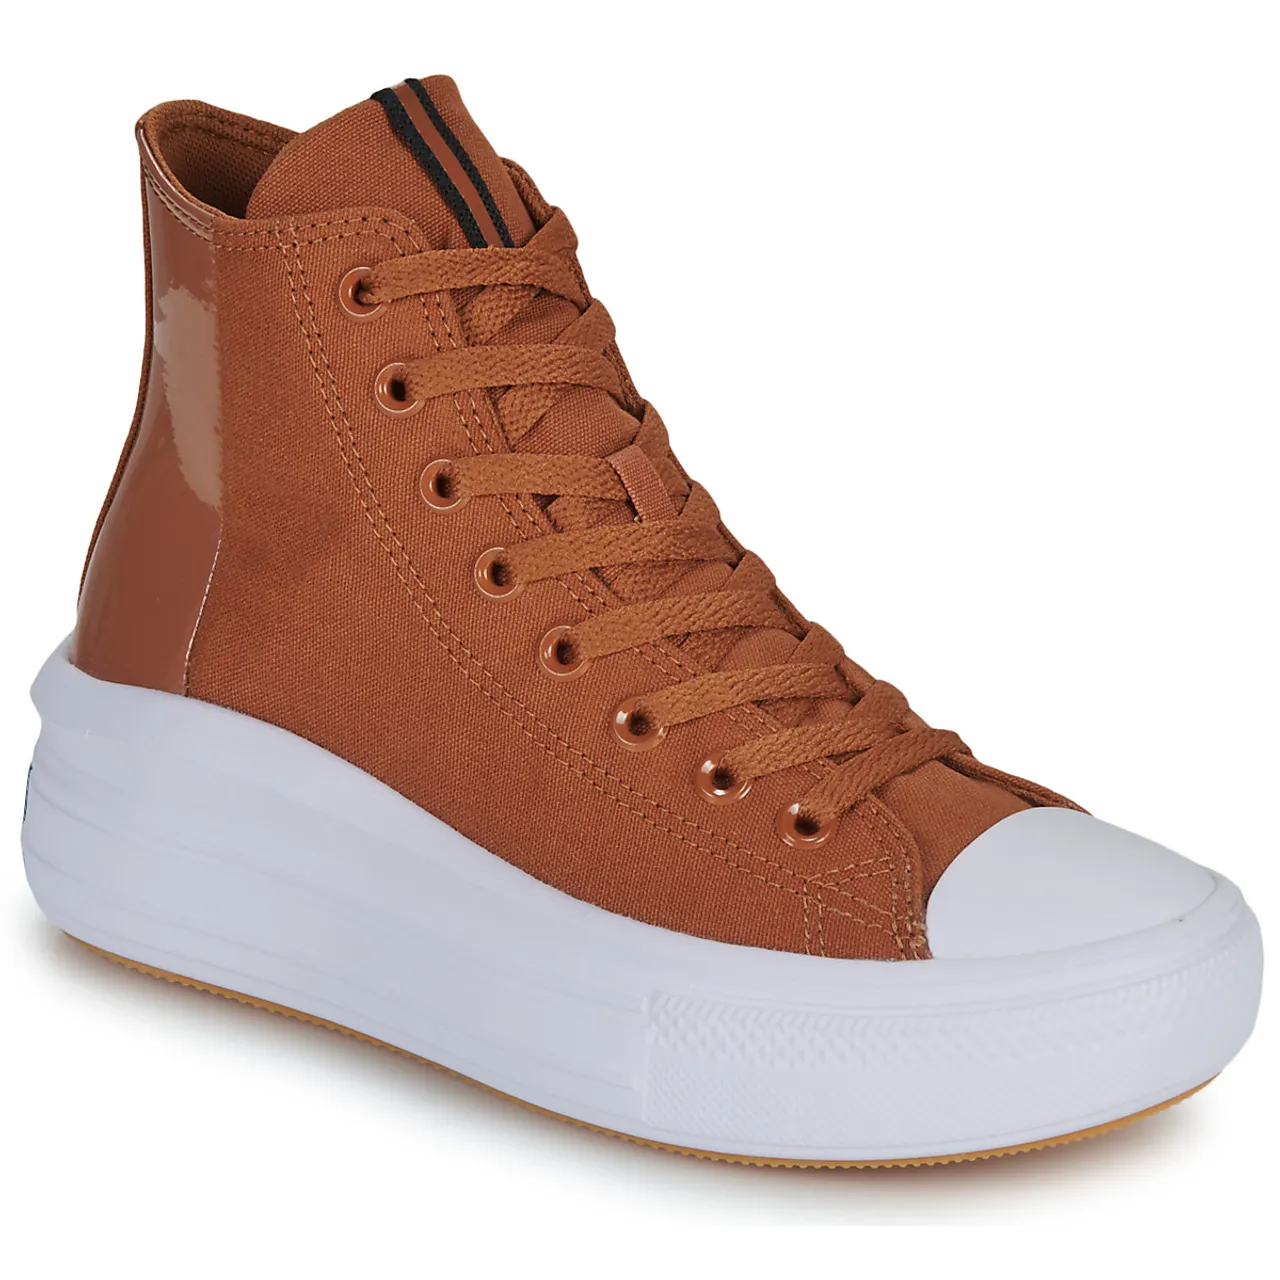 Converse  CHUCK TAYLOR ALL STAR MOVE PLATFORM TORTOISE  women's Shoes (High-top Trainers) in Brown